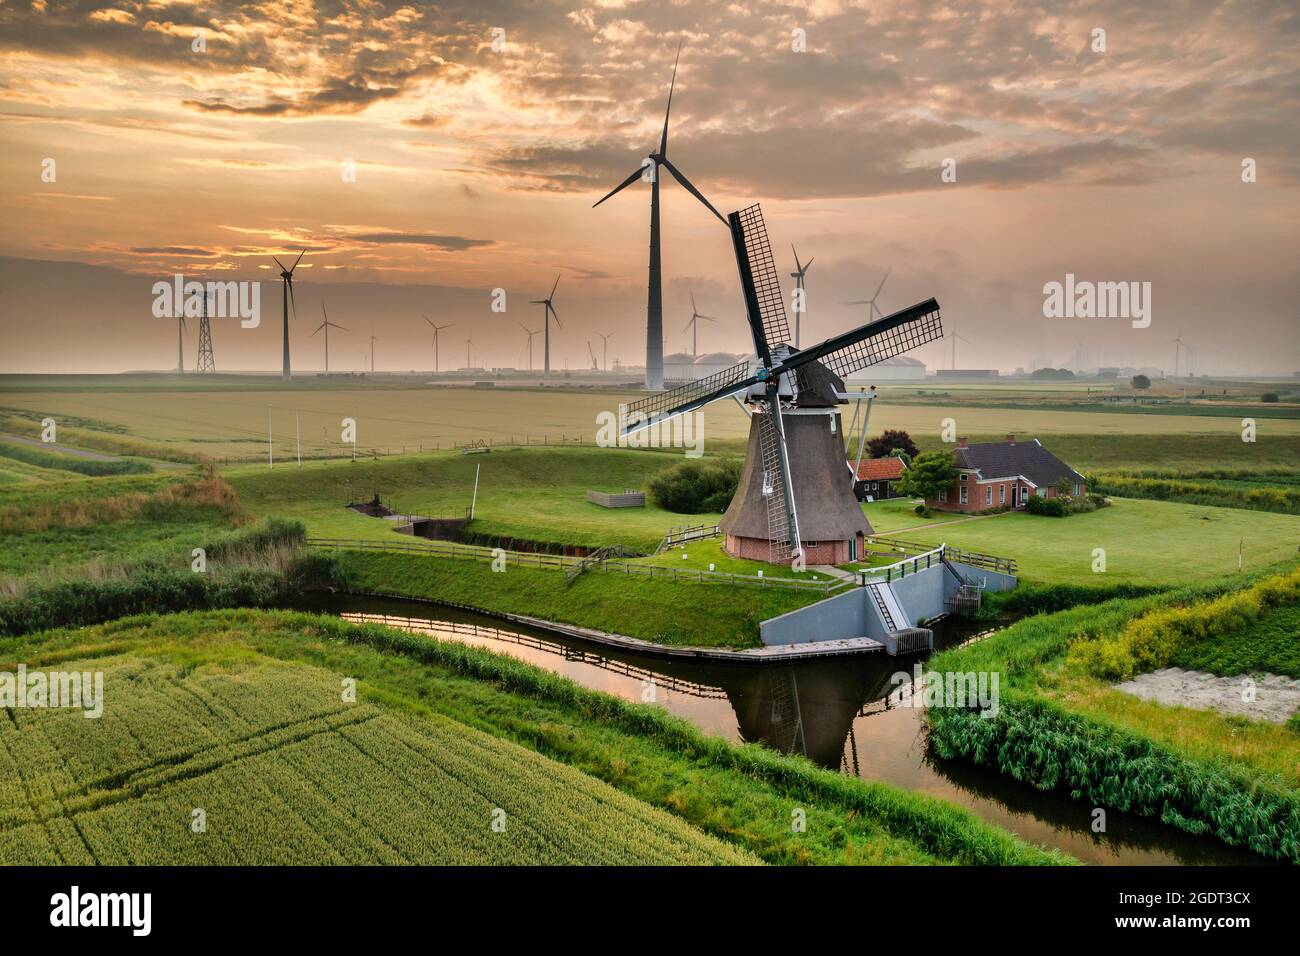 The Netherlands. Eemshaven. Wind park Eemsmond. Wind turbines. Background: ancient windmill (1897) called Goliath. Sunrise. Aerial. Stock Photo